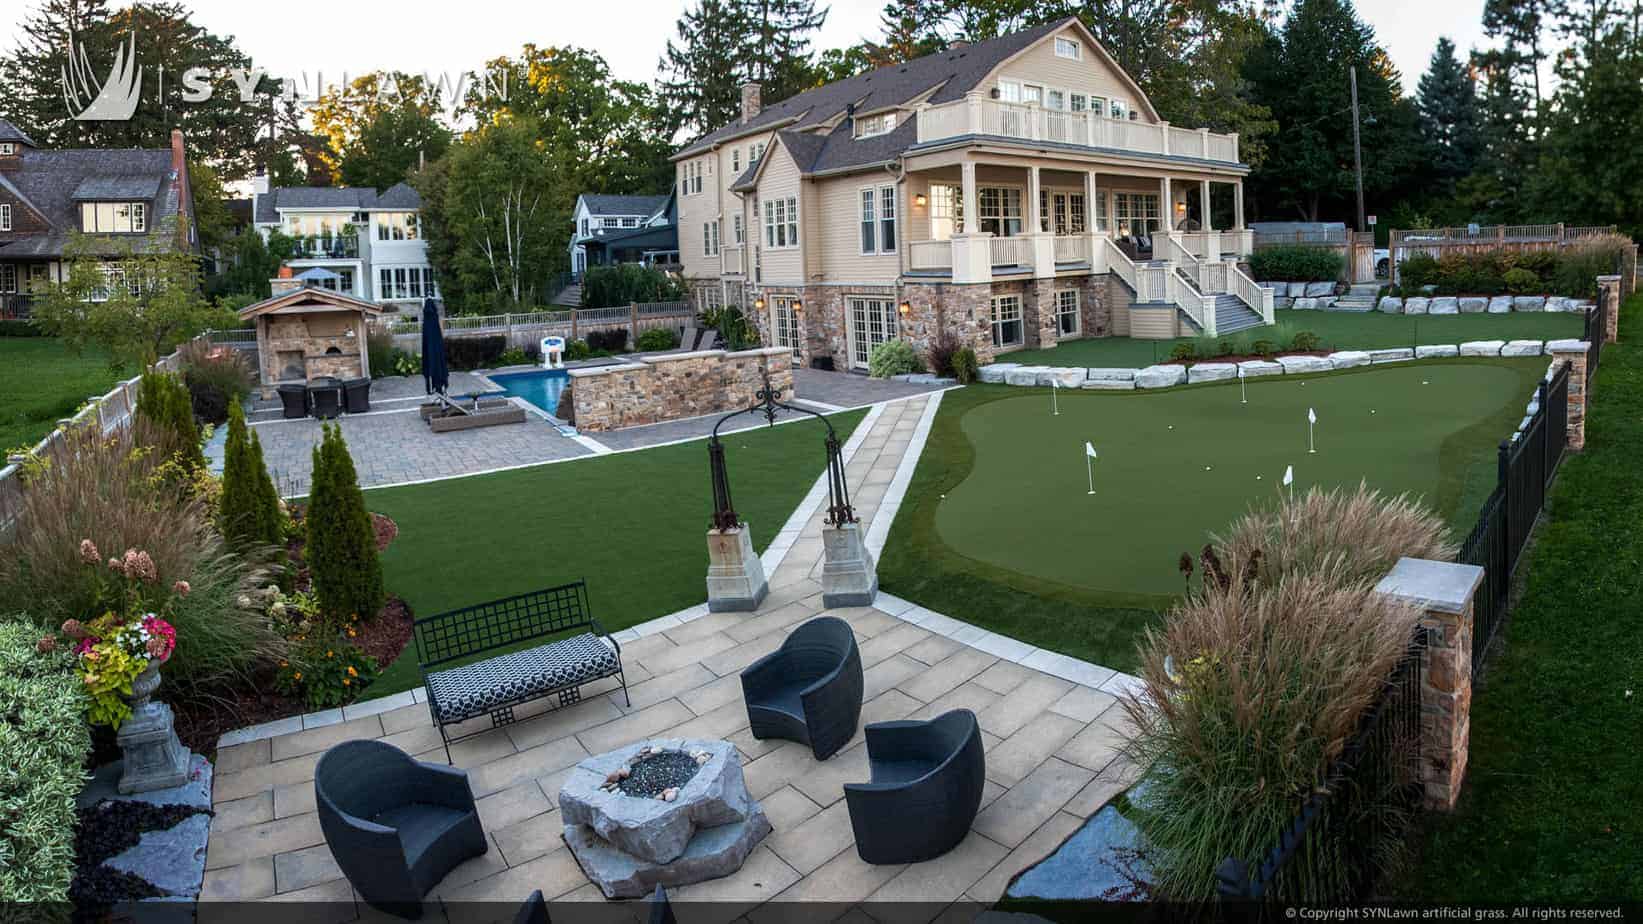 SYNLawn-artificial-grass-residential-backyard-landscape-with-putting-green